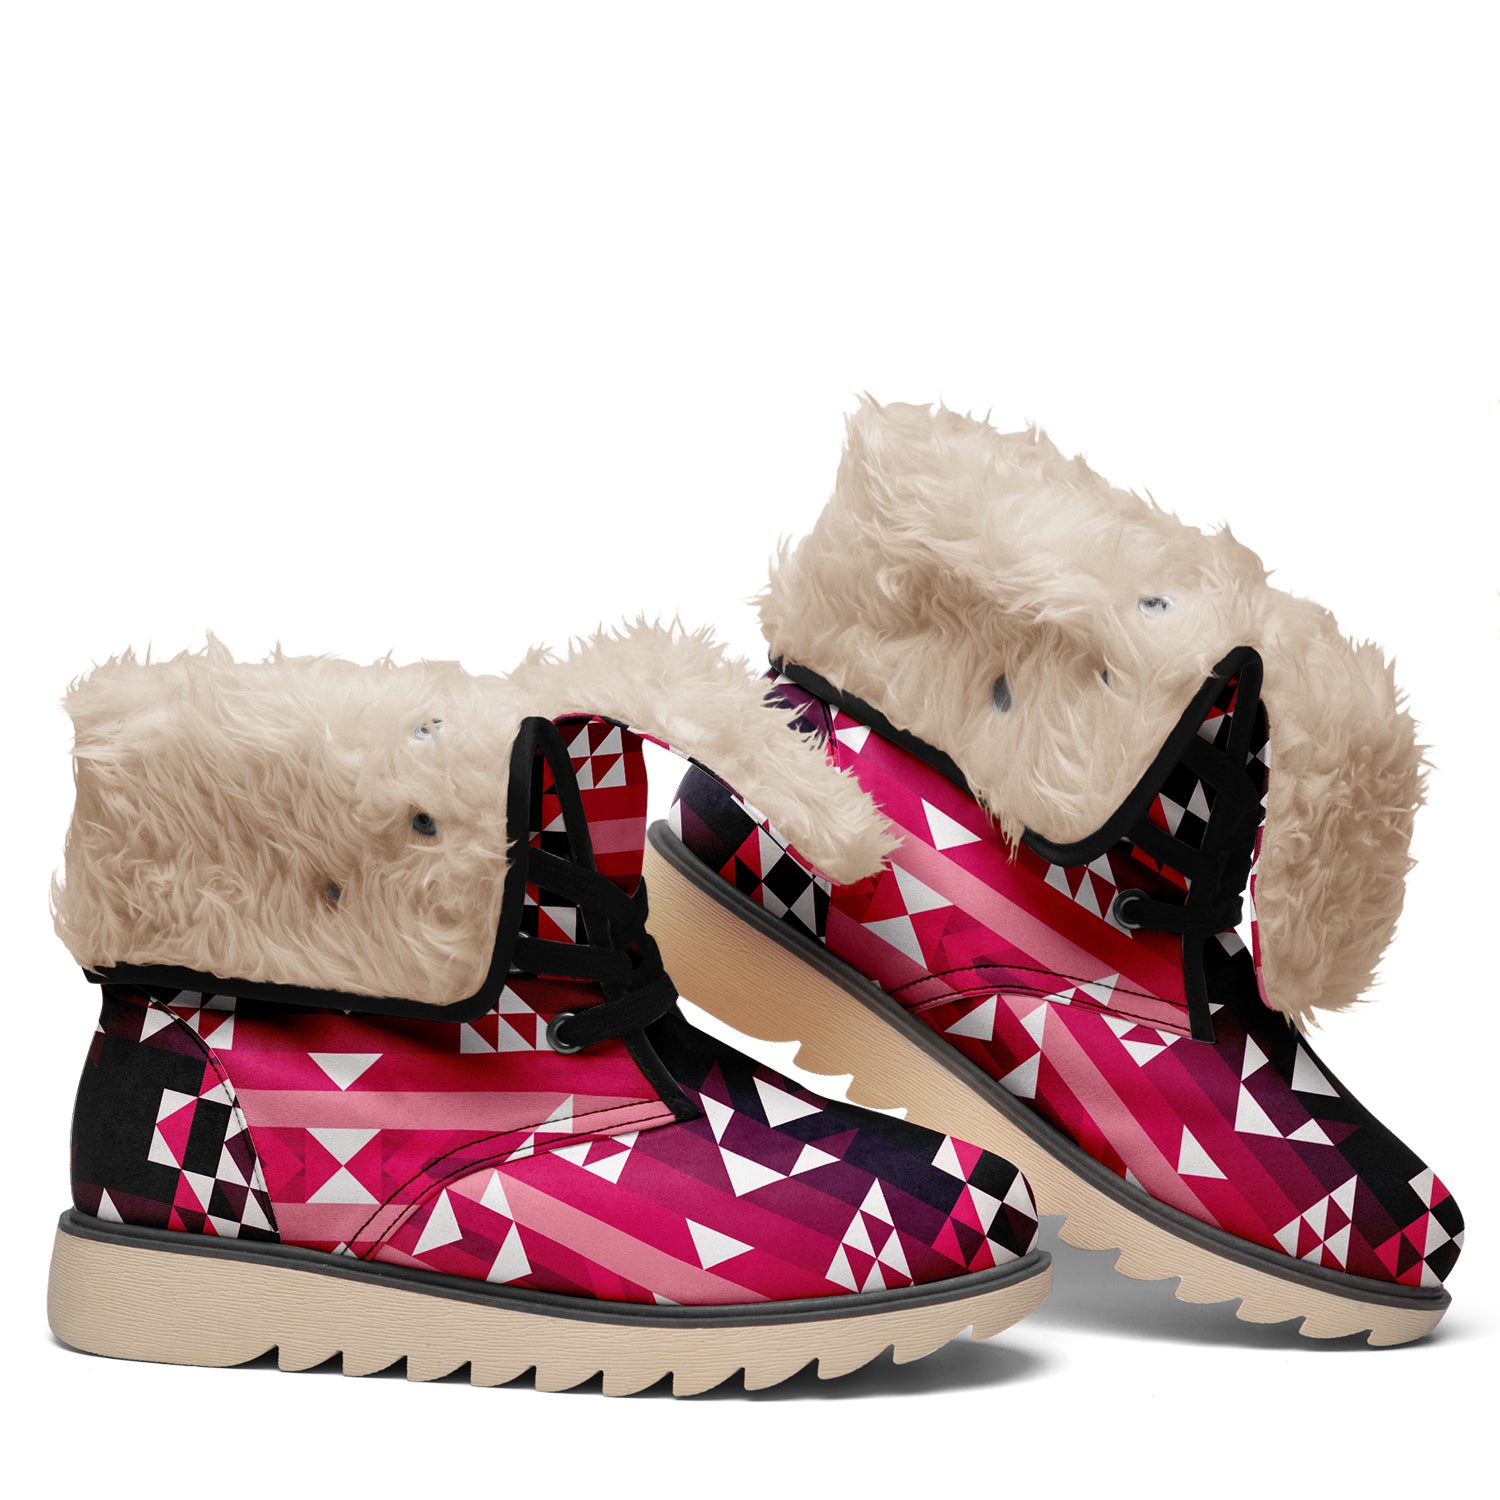 Royal Airspace Red Polar Winter Boots